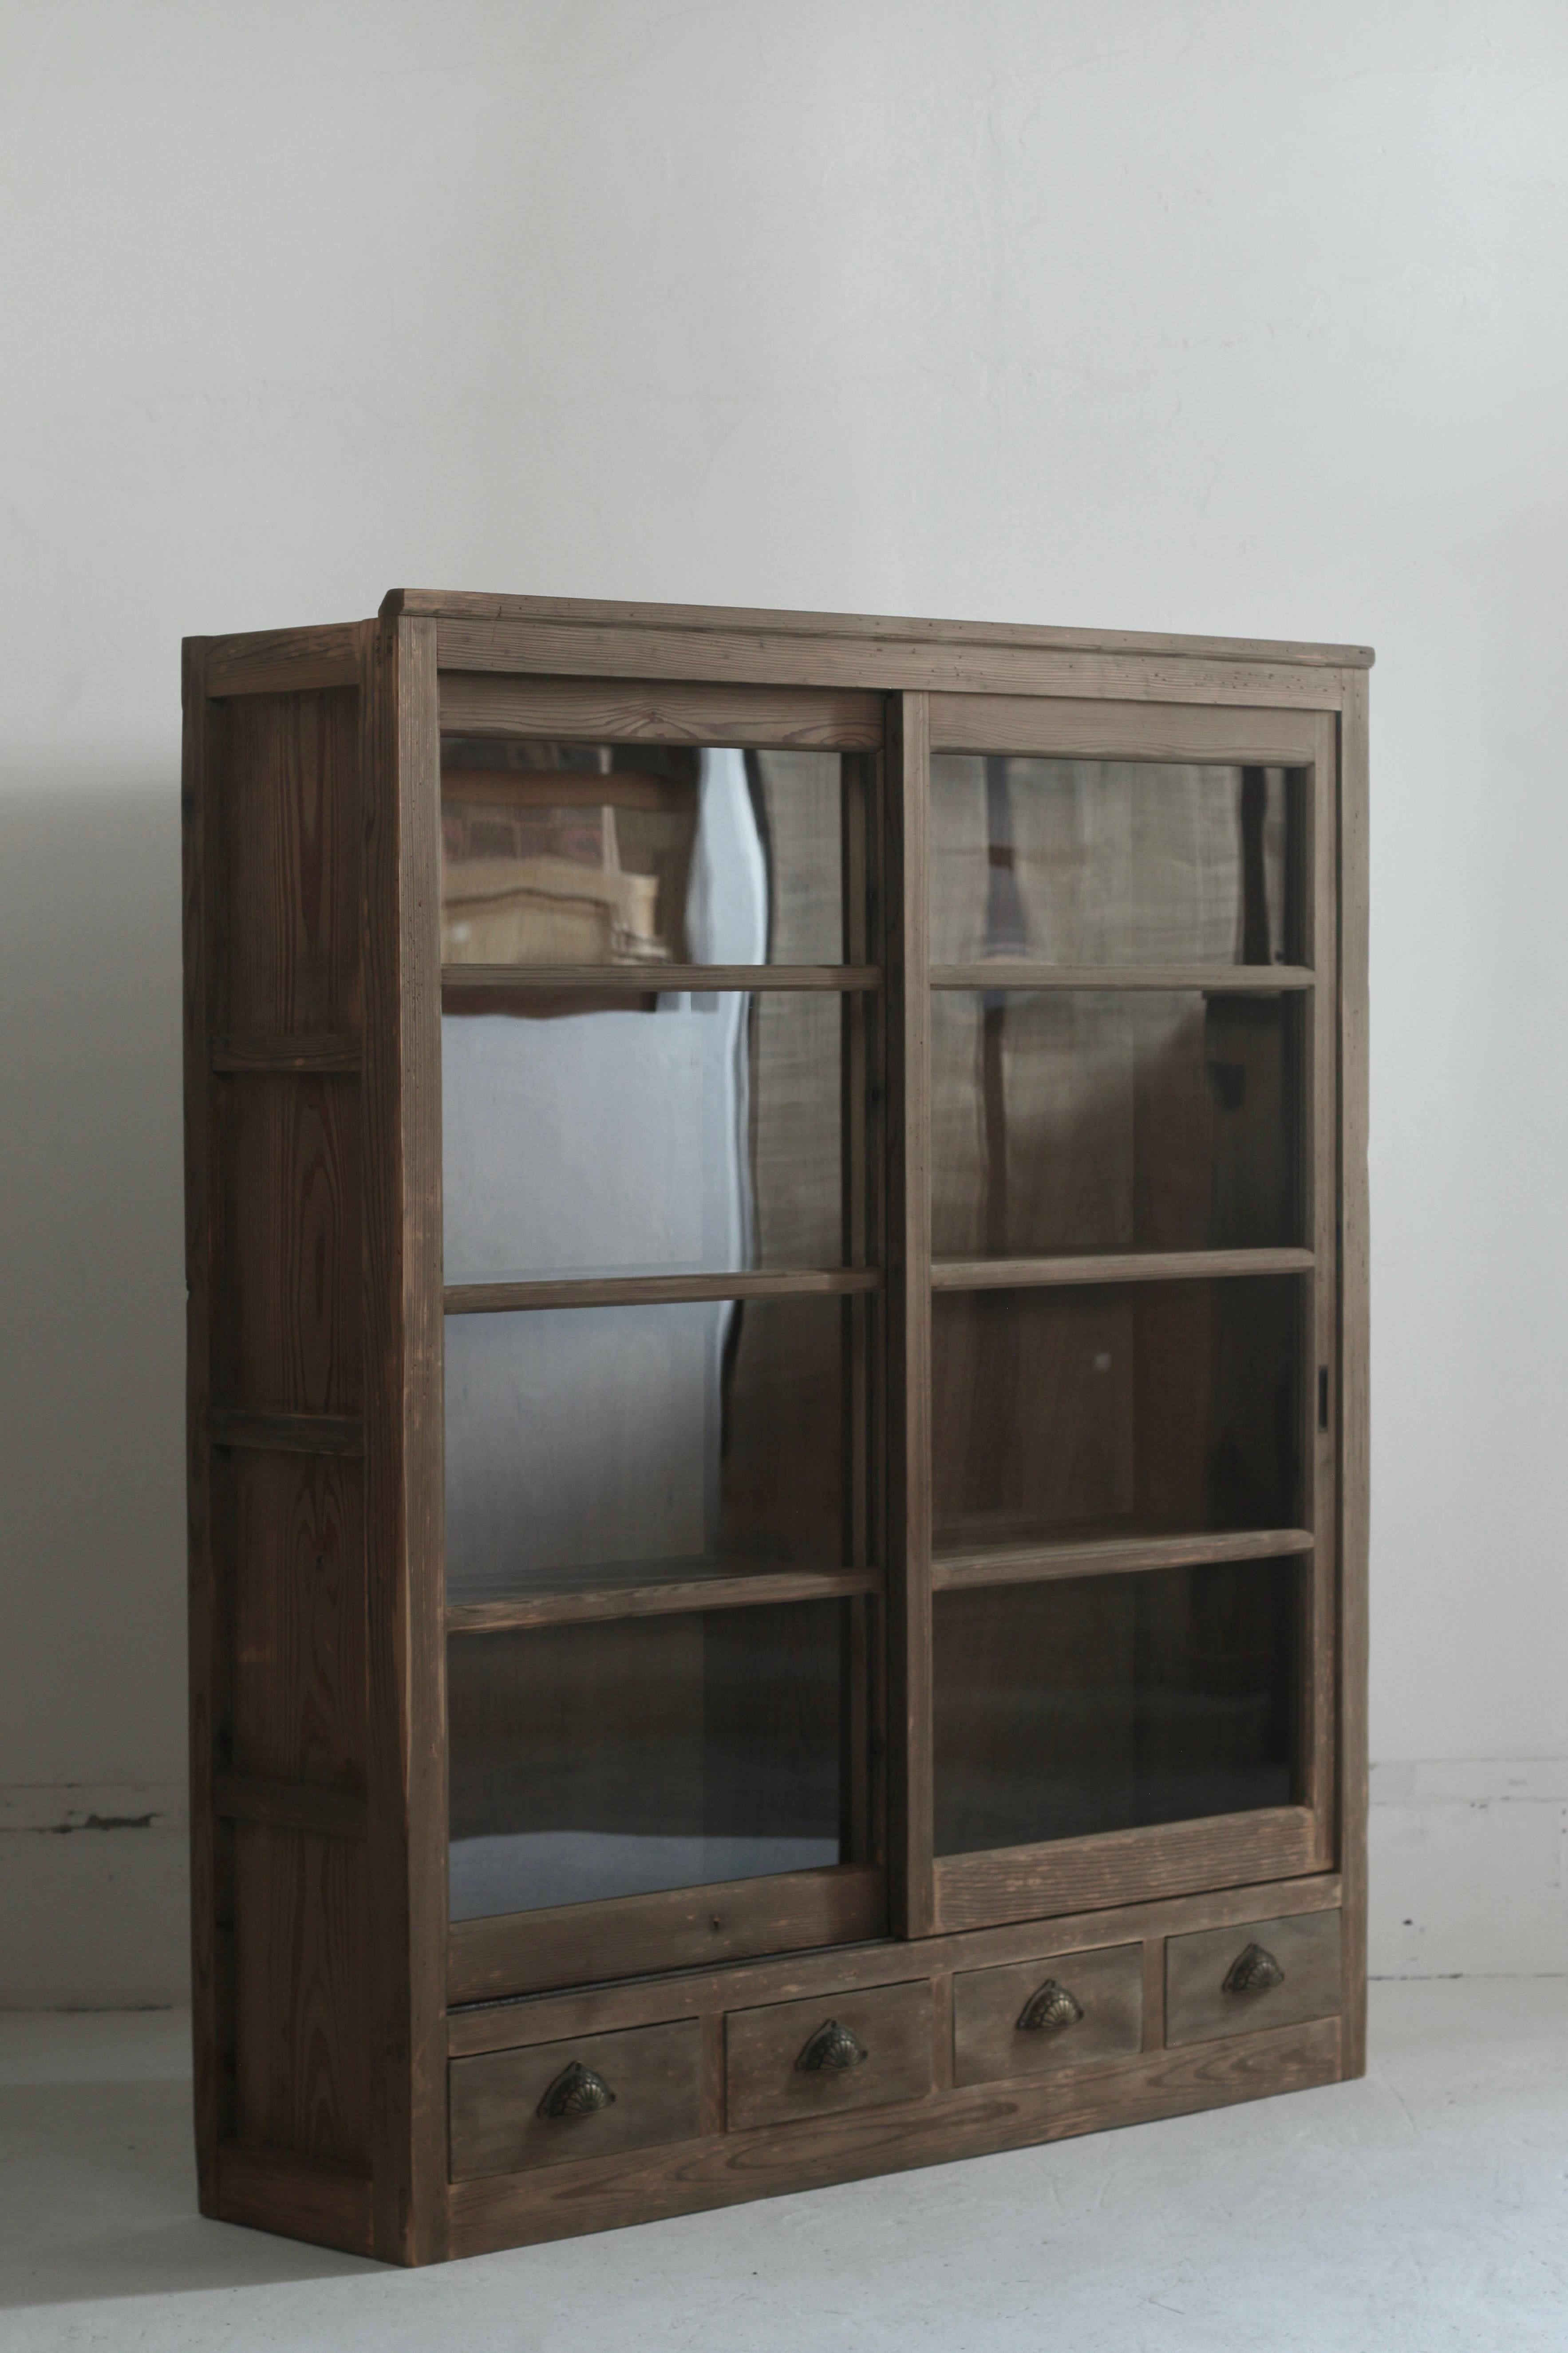 It's a cabinet made of cedar.

The shelf board is fixed, but it is devised so that the pier of the door is aligned on the shelf board so that you can see the decoration from the glass door.

A pulley and an iron rail are installed on the sliding